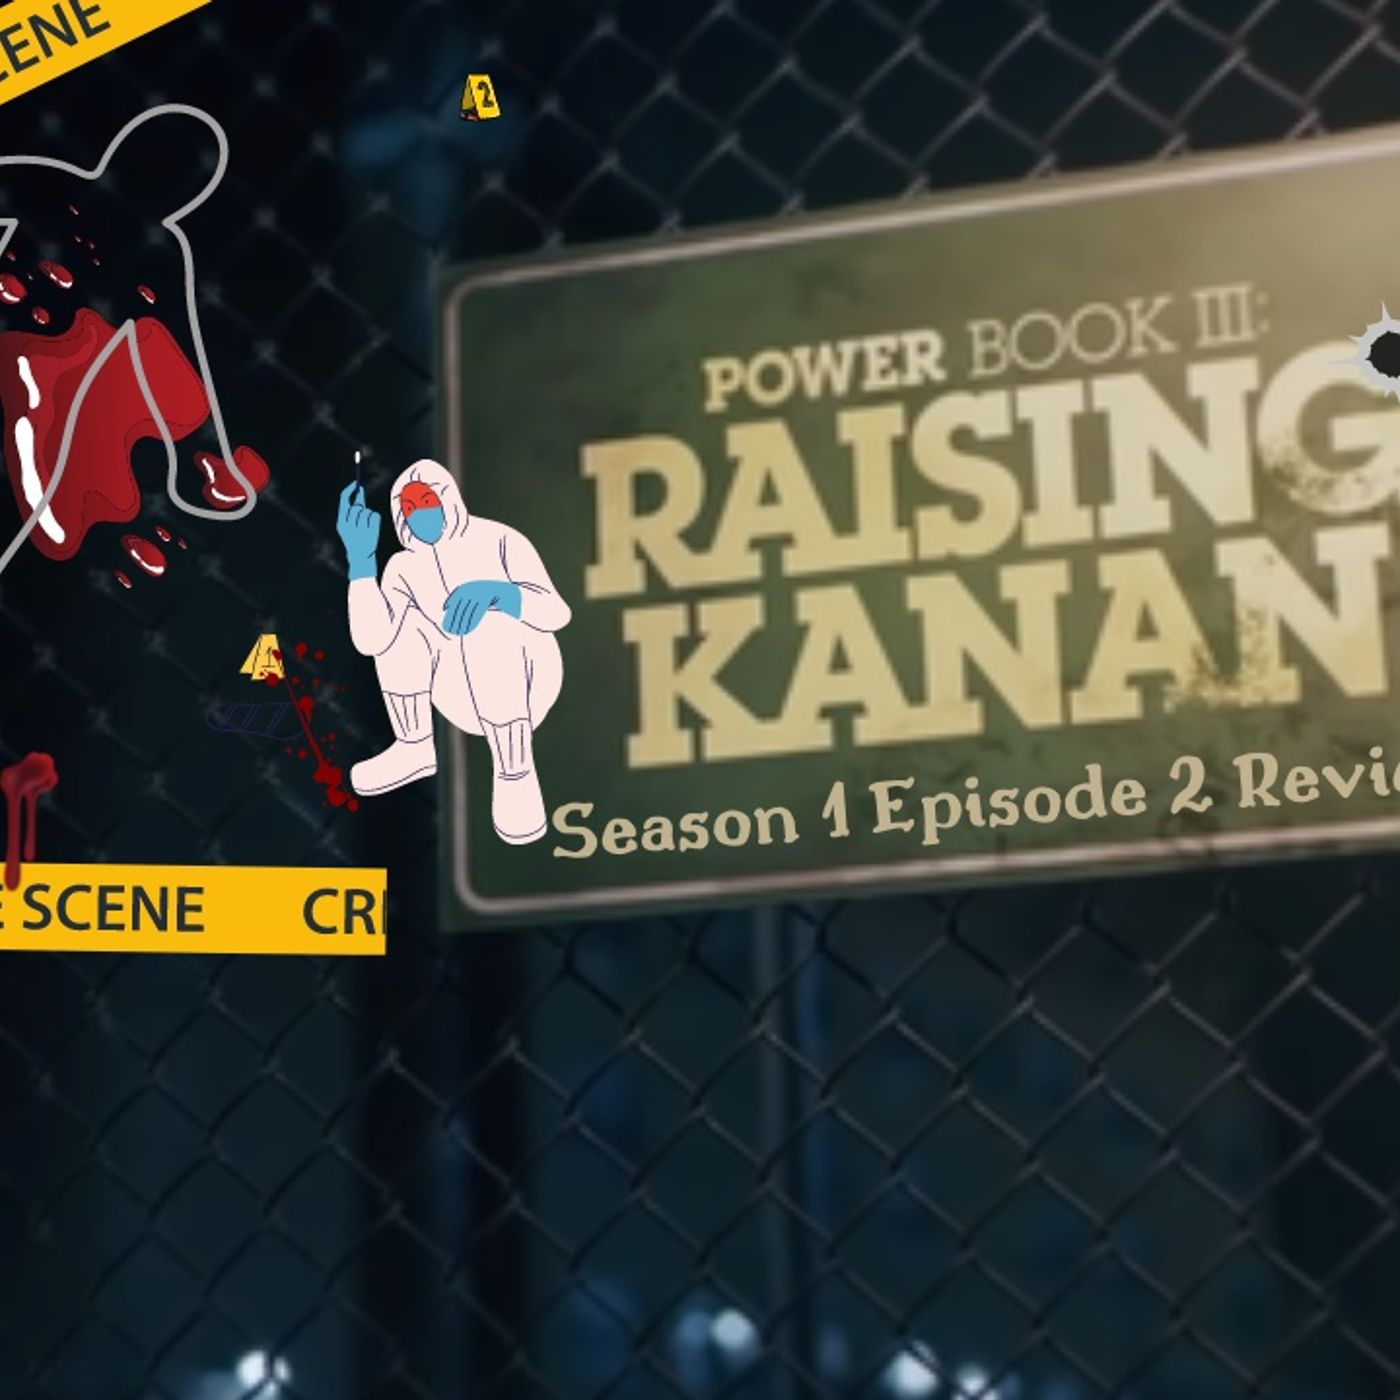 Power Book lll Raising Kanan" Reaping and Sowing" Review